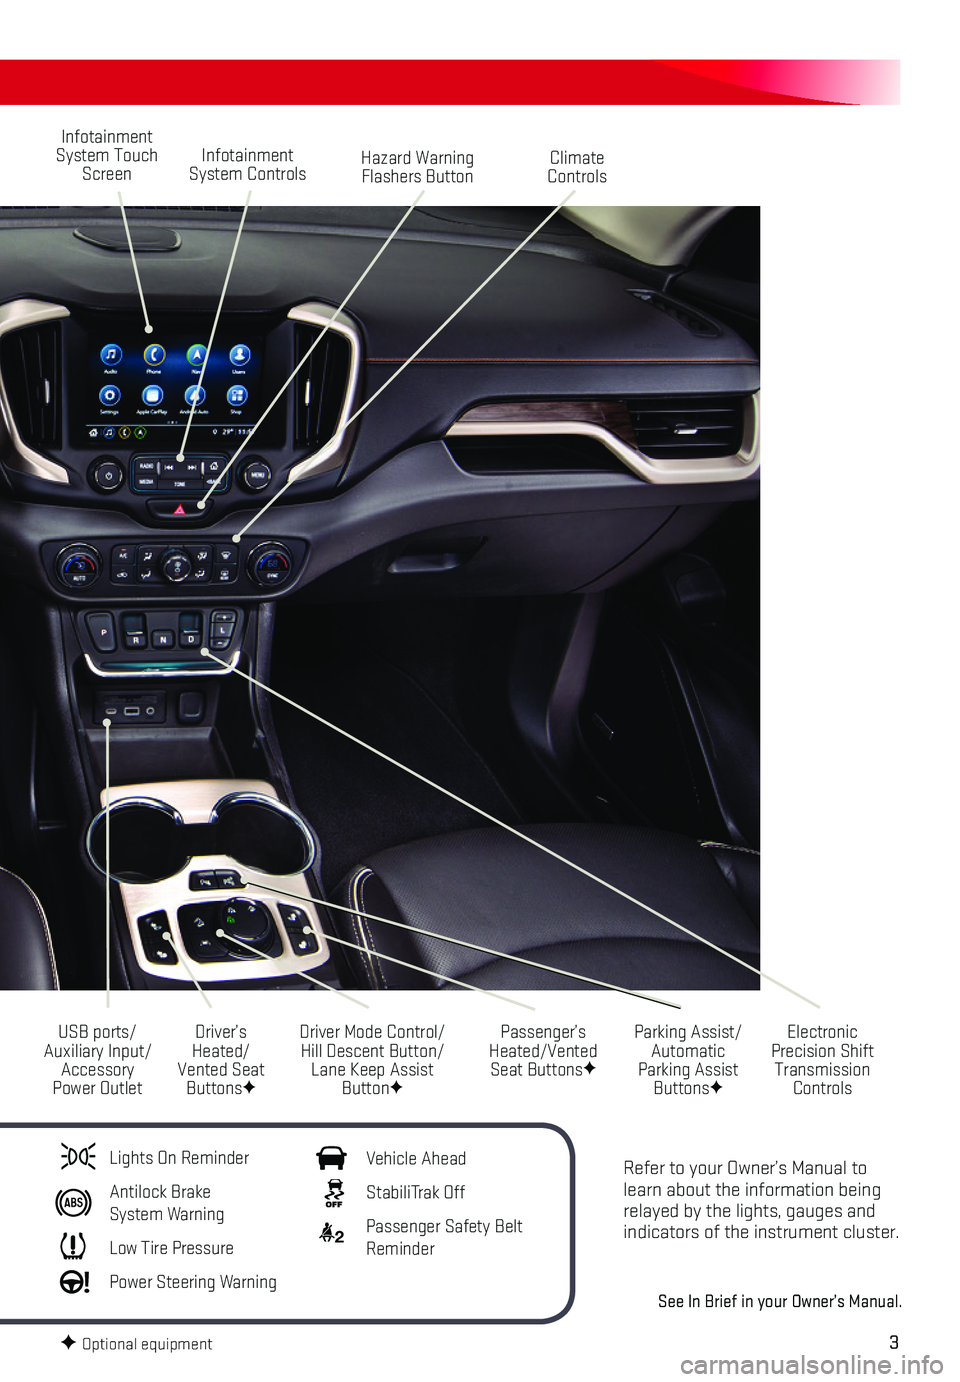 GMC TERRAIN 2018  Get To Know Guide 3
Refer to your Owner’s Manual to learn about the information being relayed by the lights, gauges and indicators of the instrument cluster.
See In Brief in your Owner’s Manual.
Infotainment System